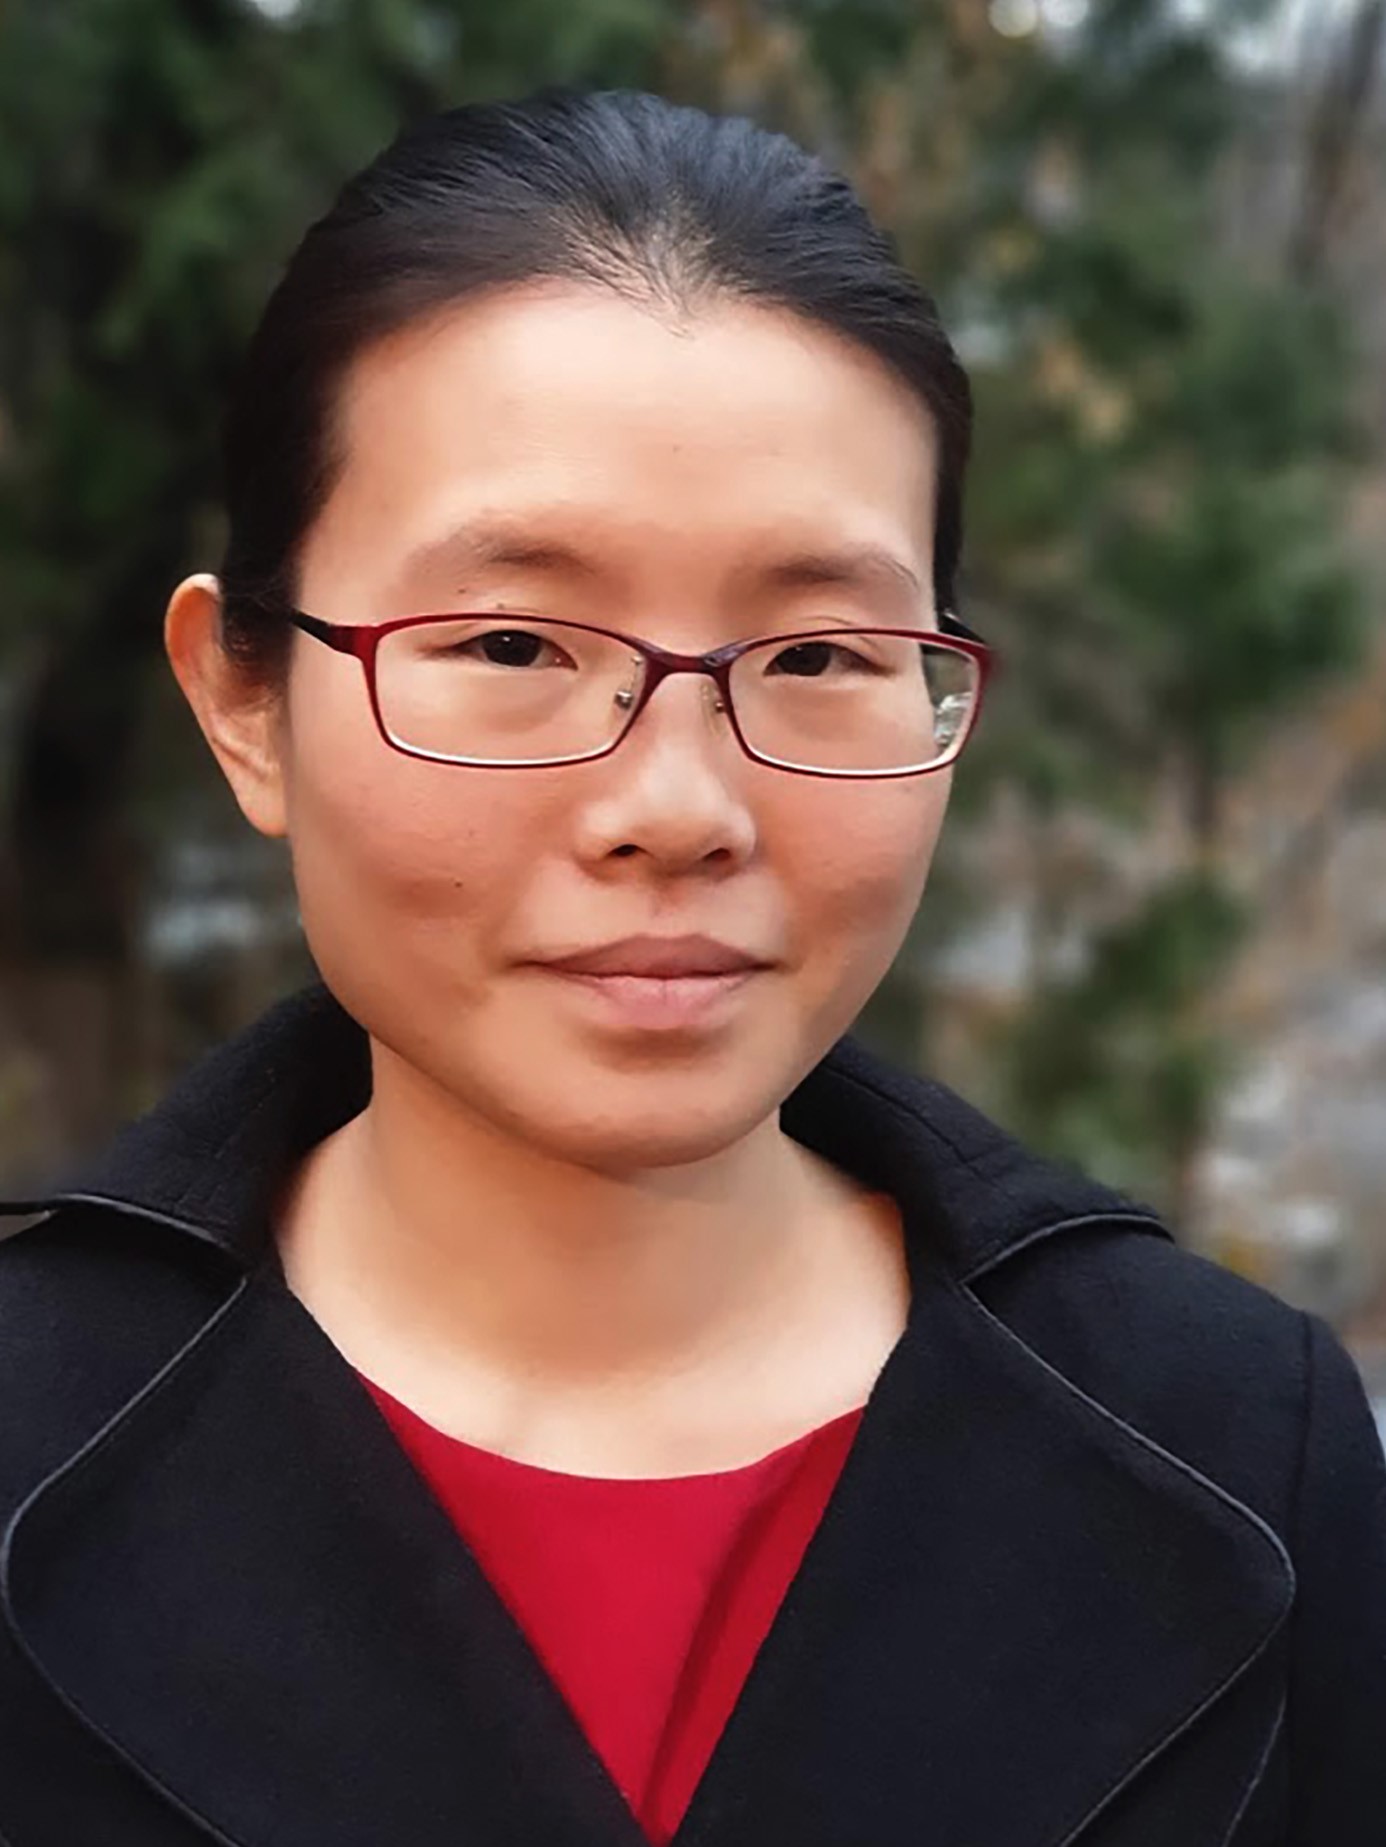 A headshot of Lau Ting Hui who has black hair which is tied back. She is wearing glasses with a red frame and a black jacket with a red top underneath. She is standing in front of greenery.